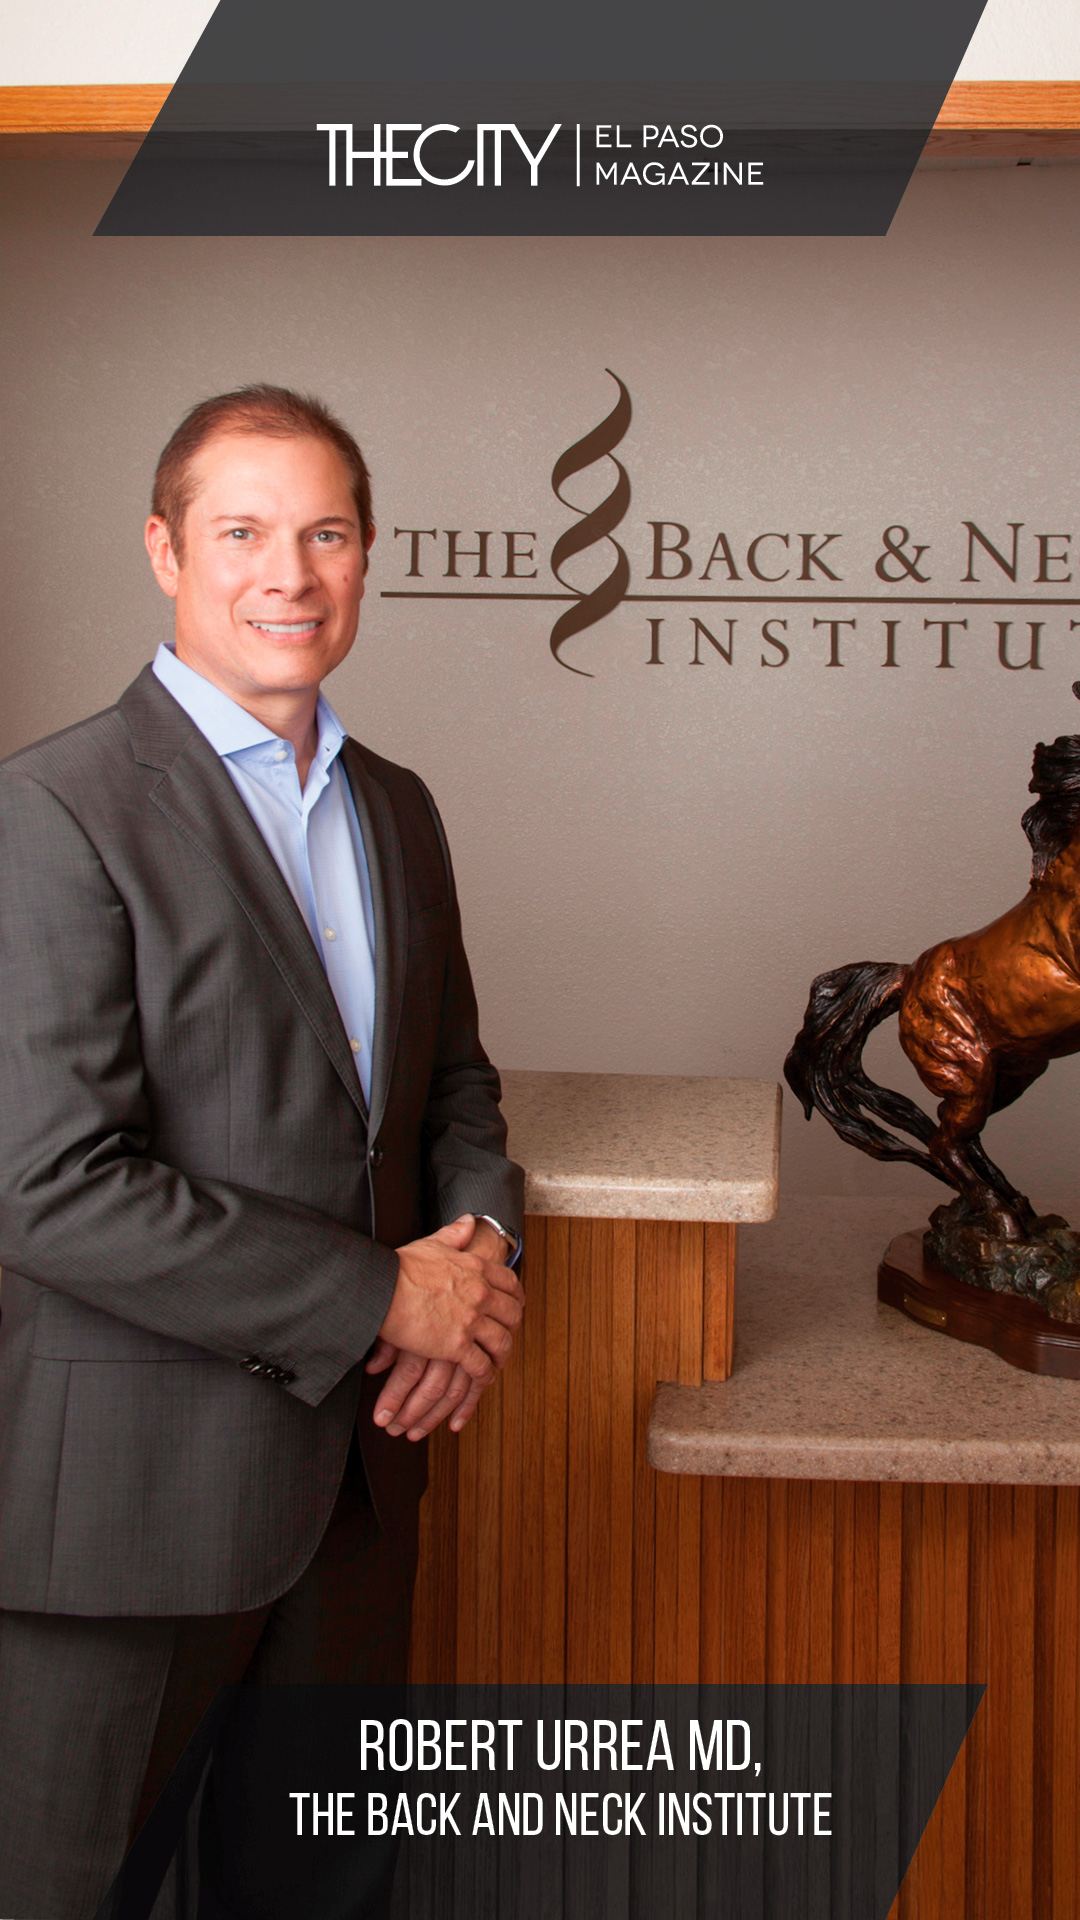 Healthcare Professionals:  Robert Urrea, md The Back and neck institute